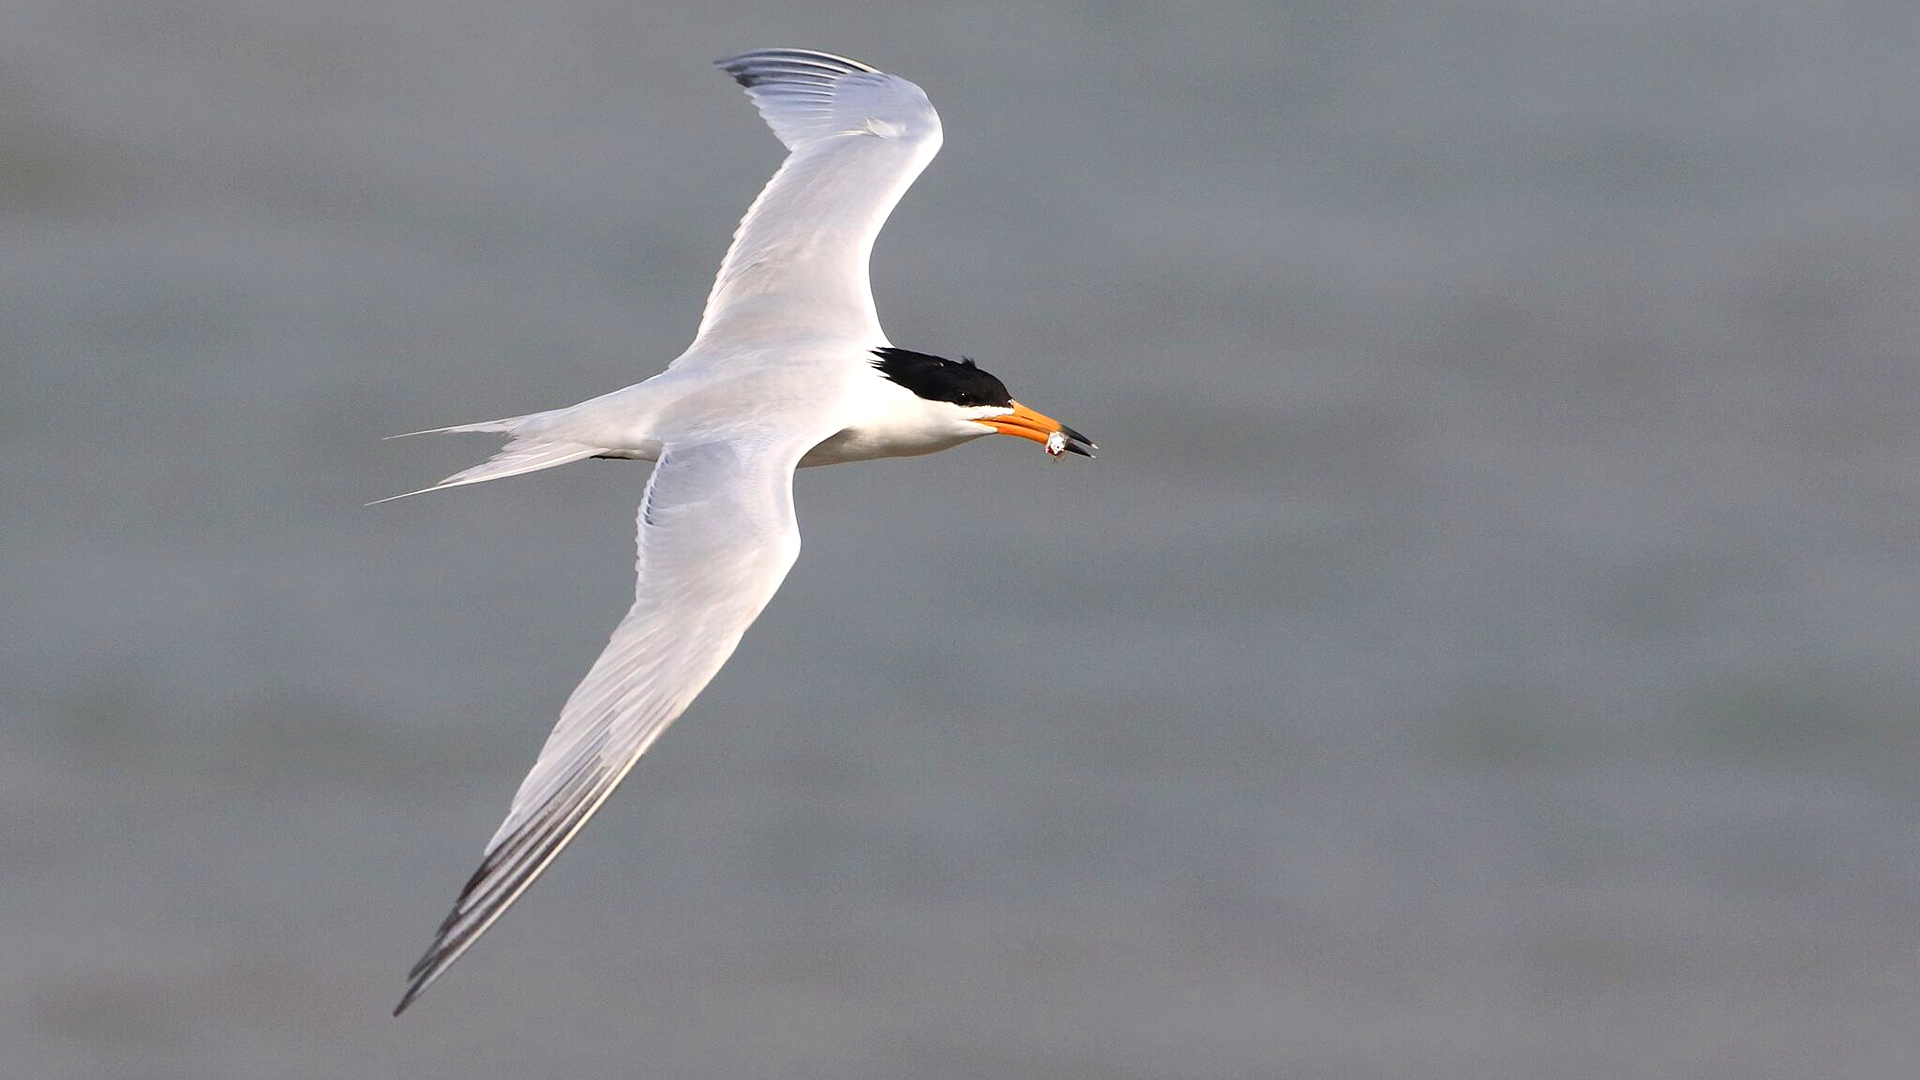 The Chinese crested tern is one of the most threatened seabirds worldwide. Photo: Birdlife International